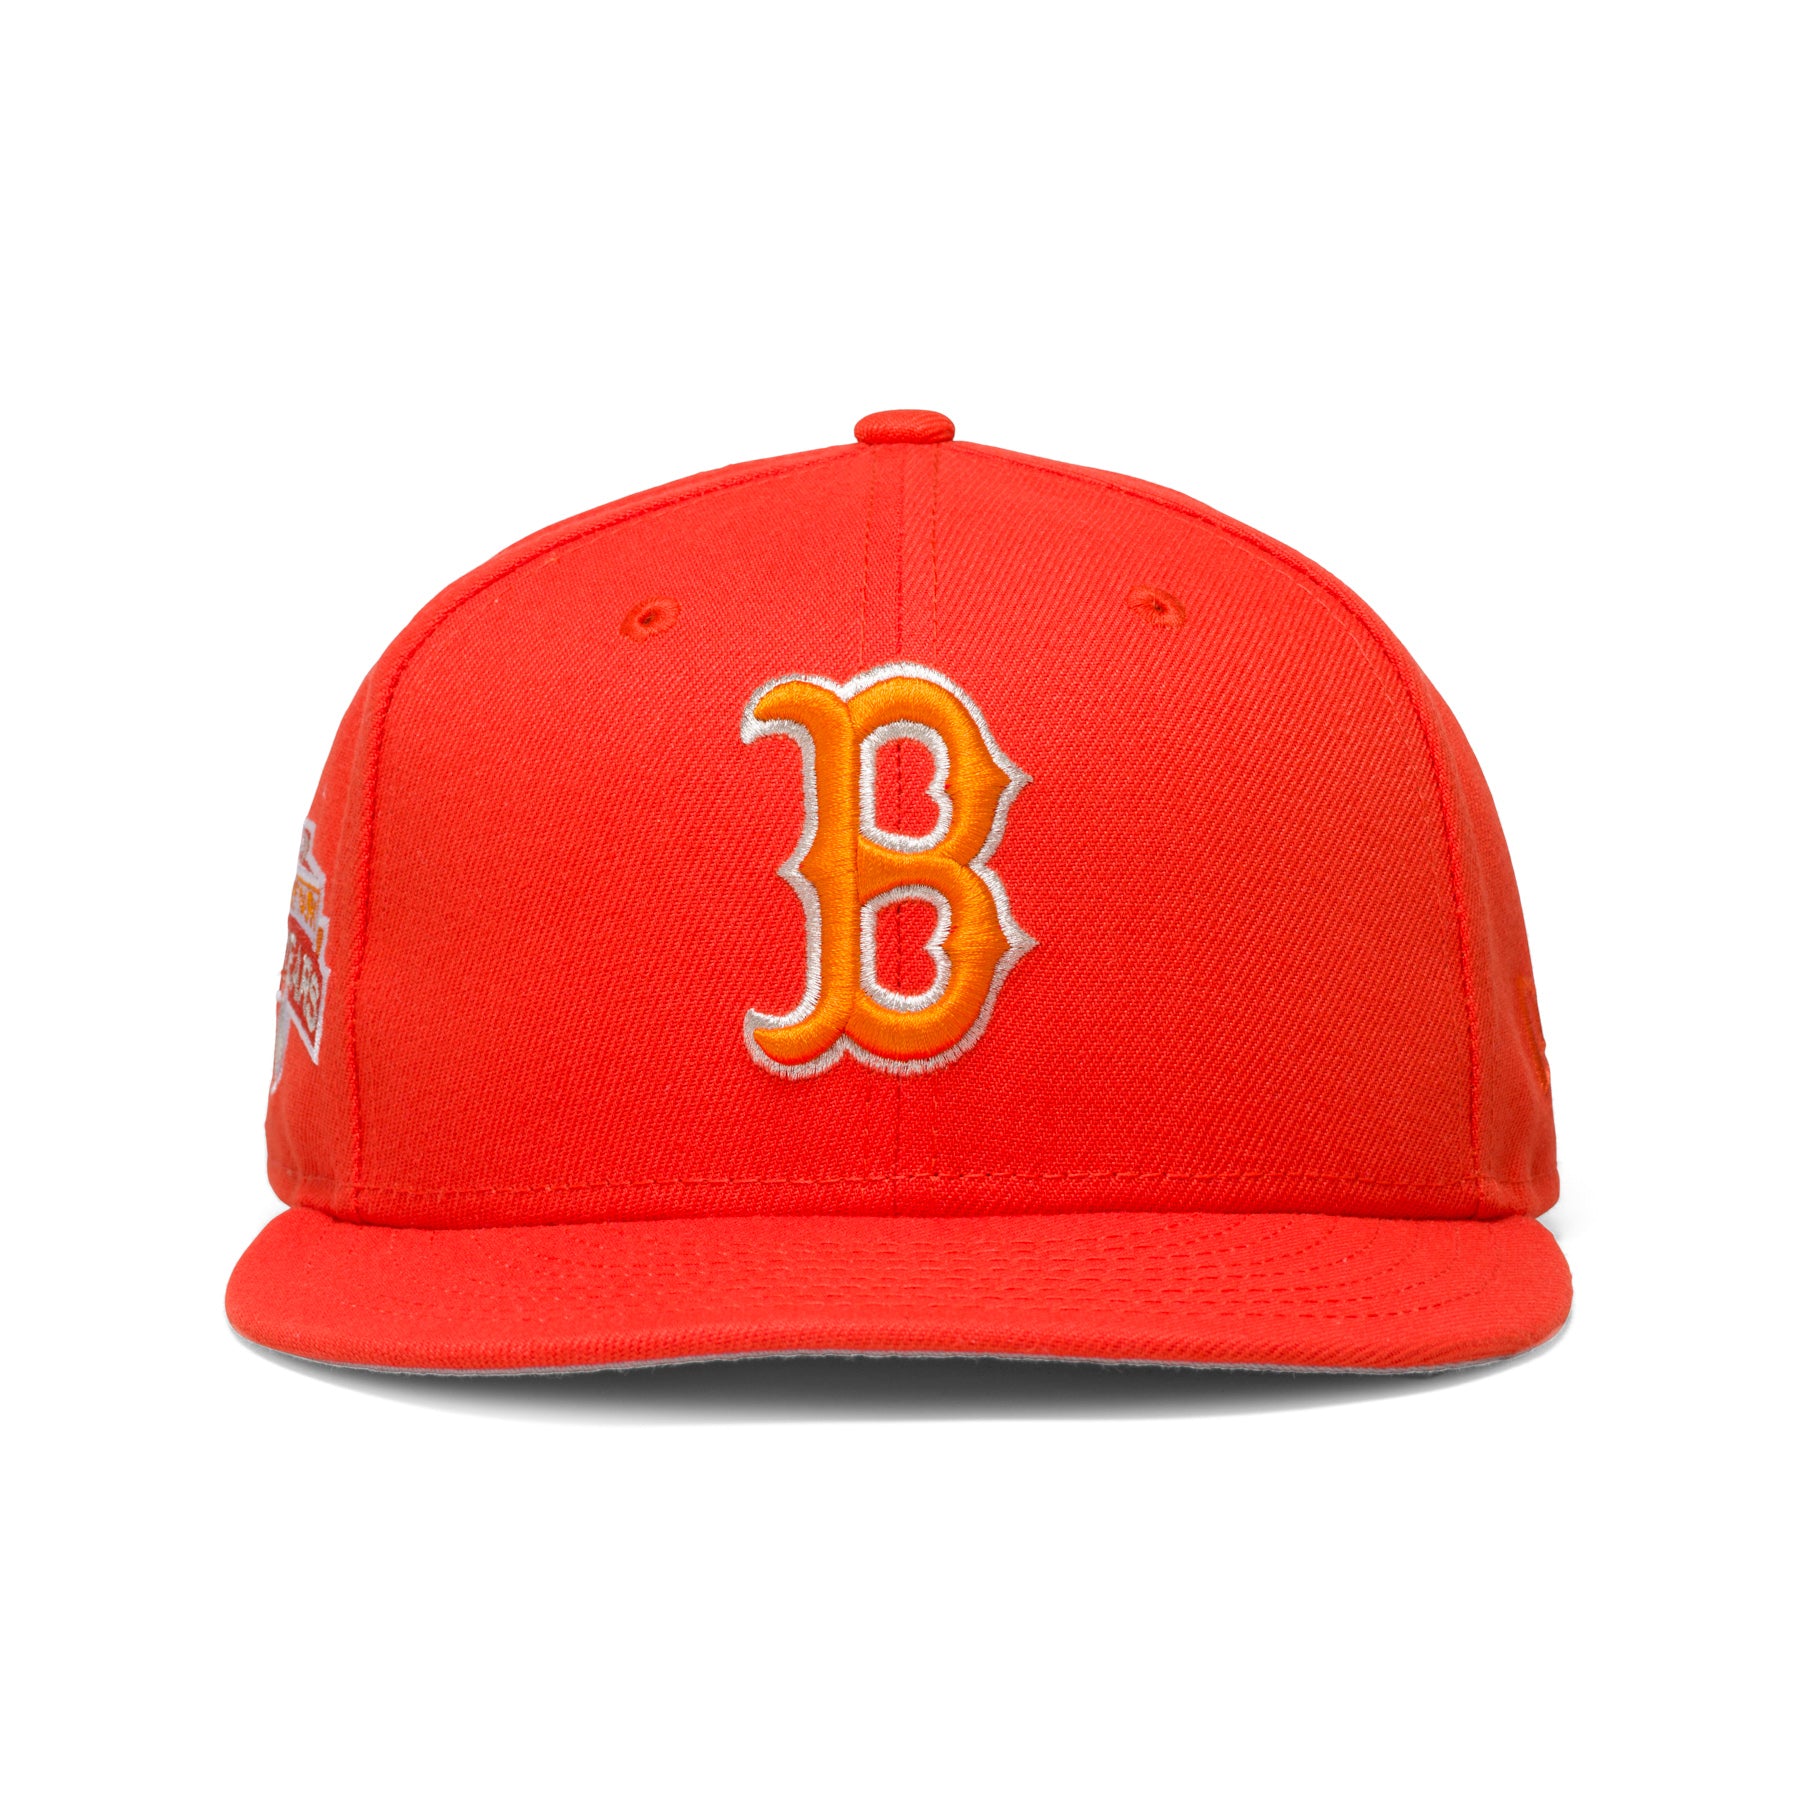 Concepts x New Era 59FIFTY Boston Red Sox 100th Anniversary Fitted Hat (Orange) 7 1/4